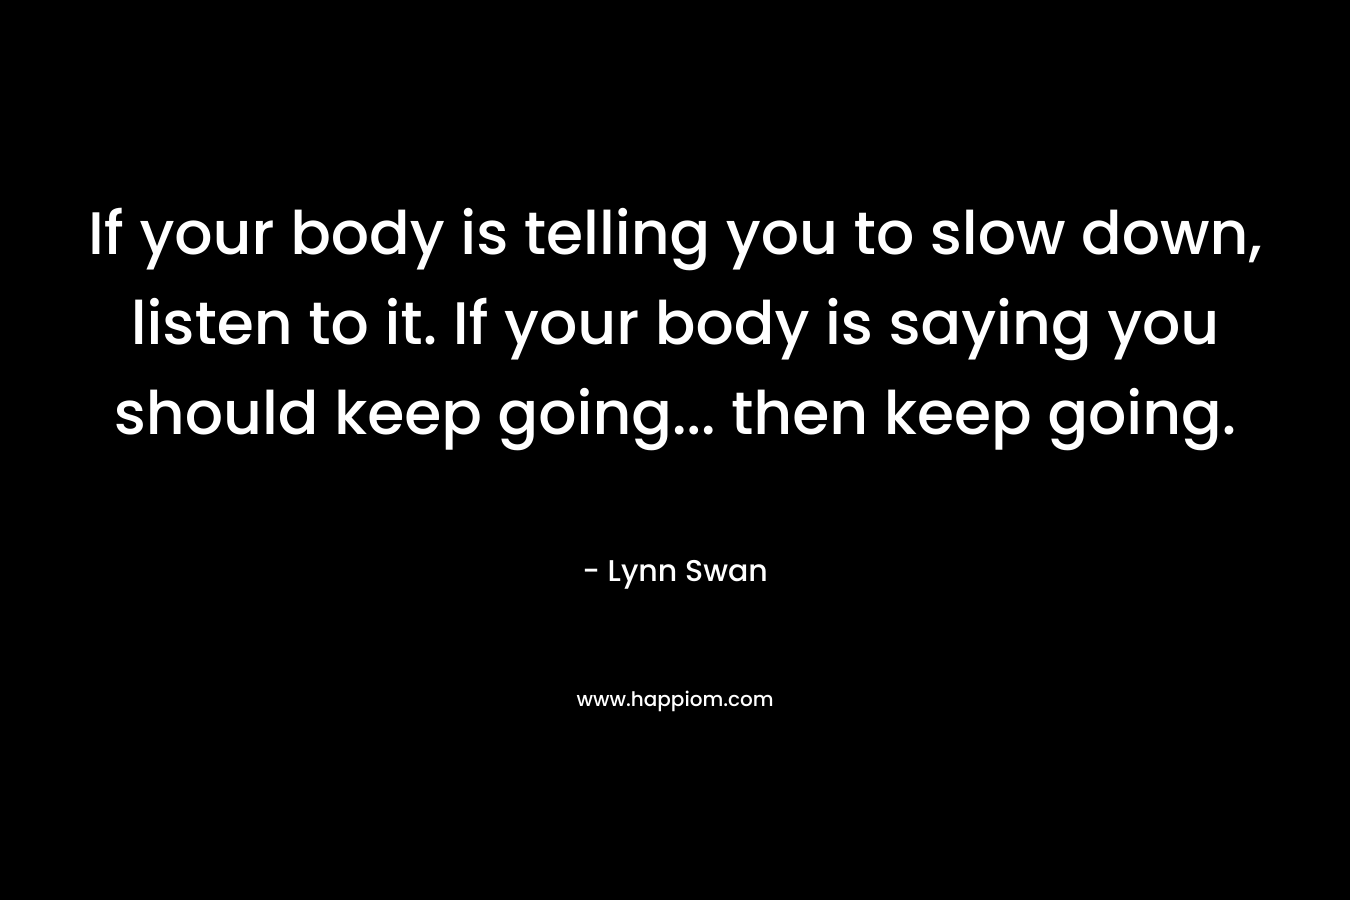 If your body is telling you to slow down, listen to it. If your body is saying you should keep going… then keep going. – Lynn Swan